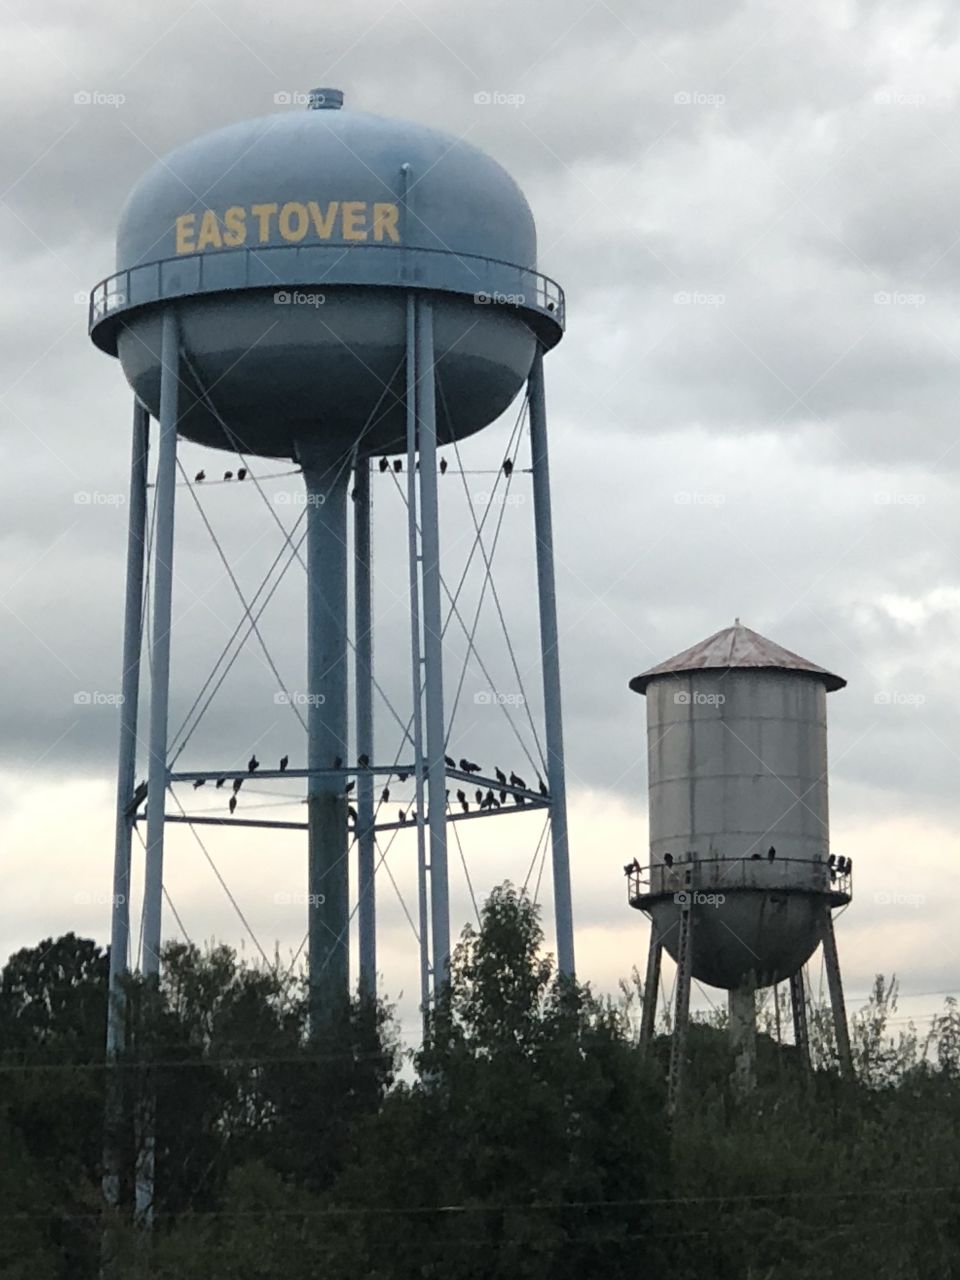 Crows gathered on water tower in Eastover, SC